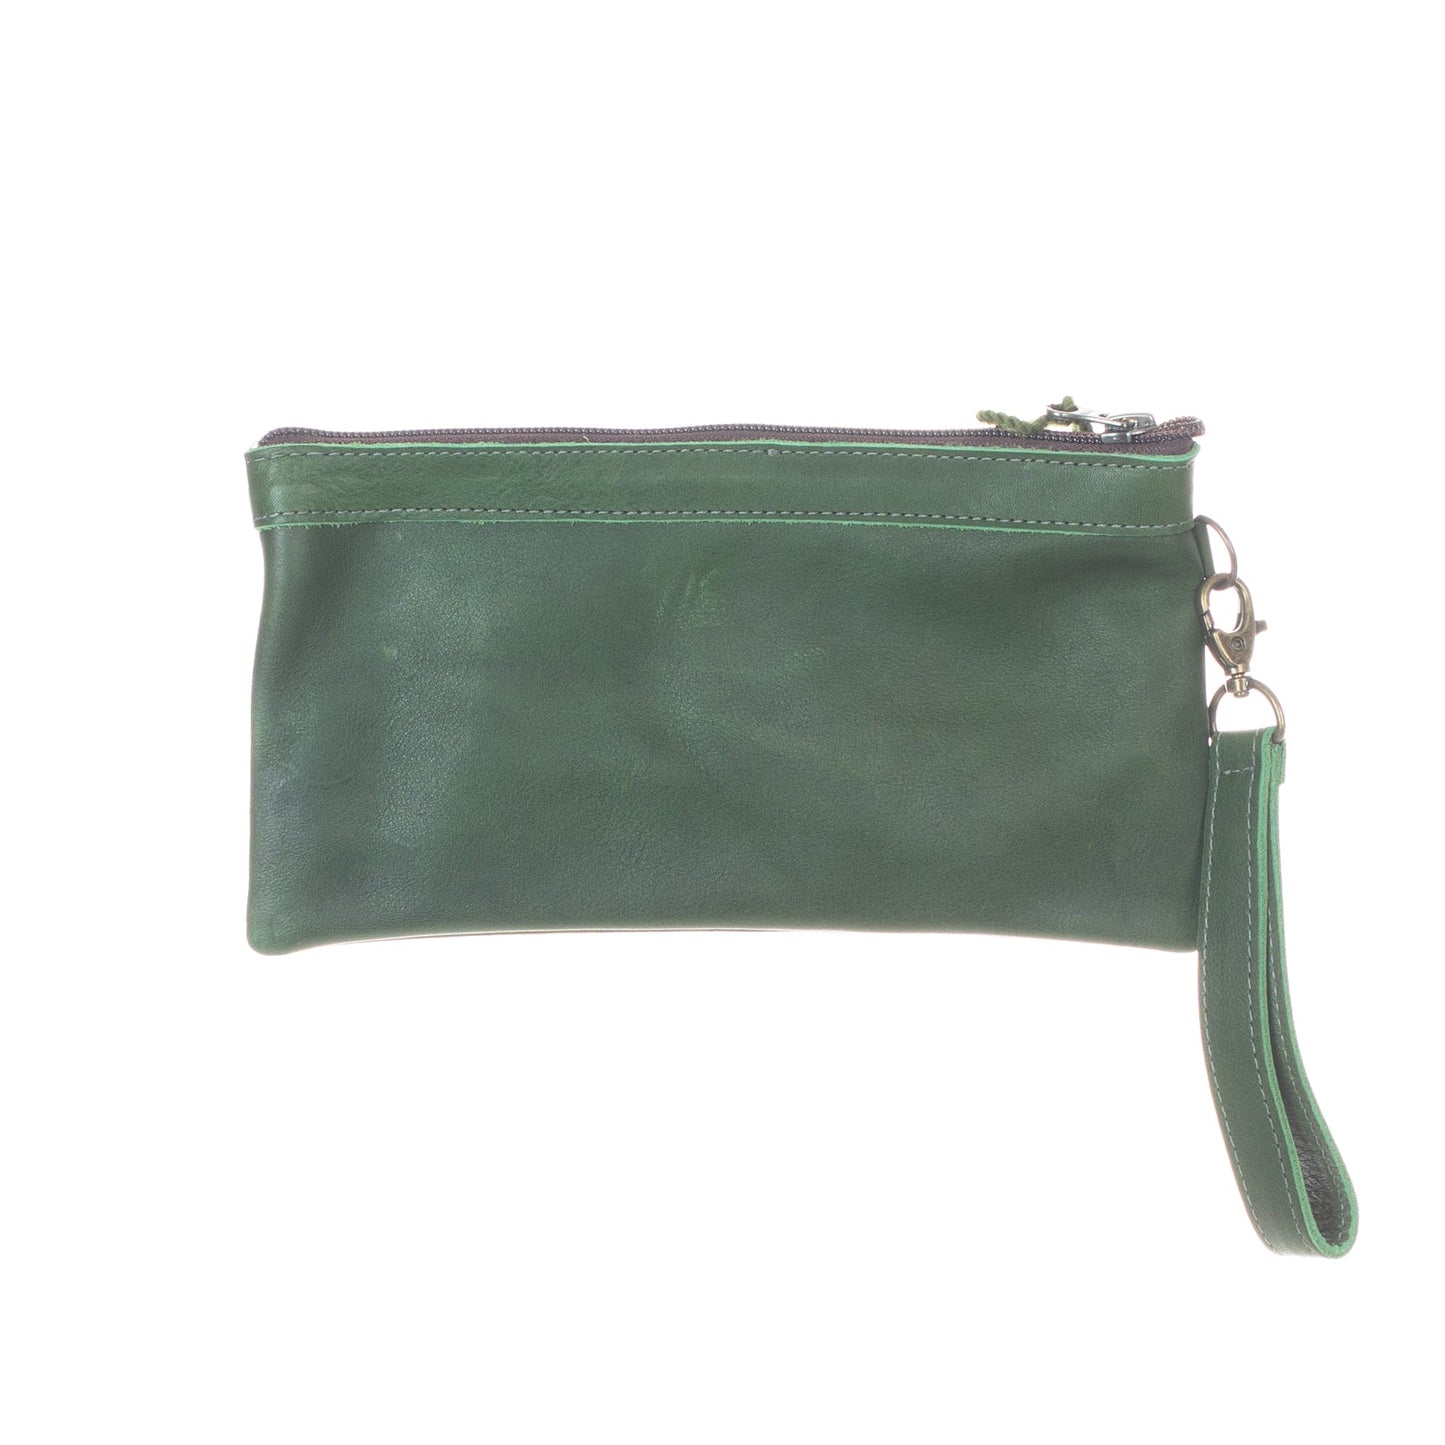 THE PERFECT CLUTCH - FULL LEATHER - SIENNA